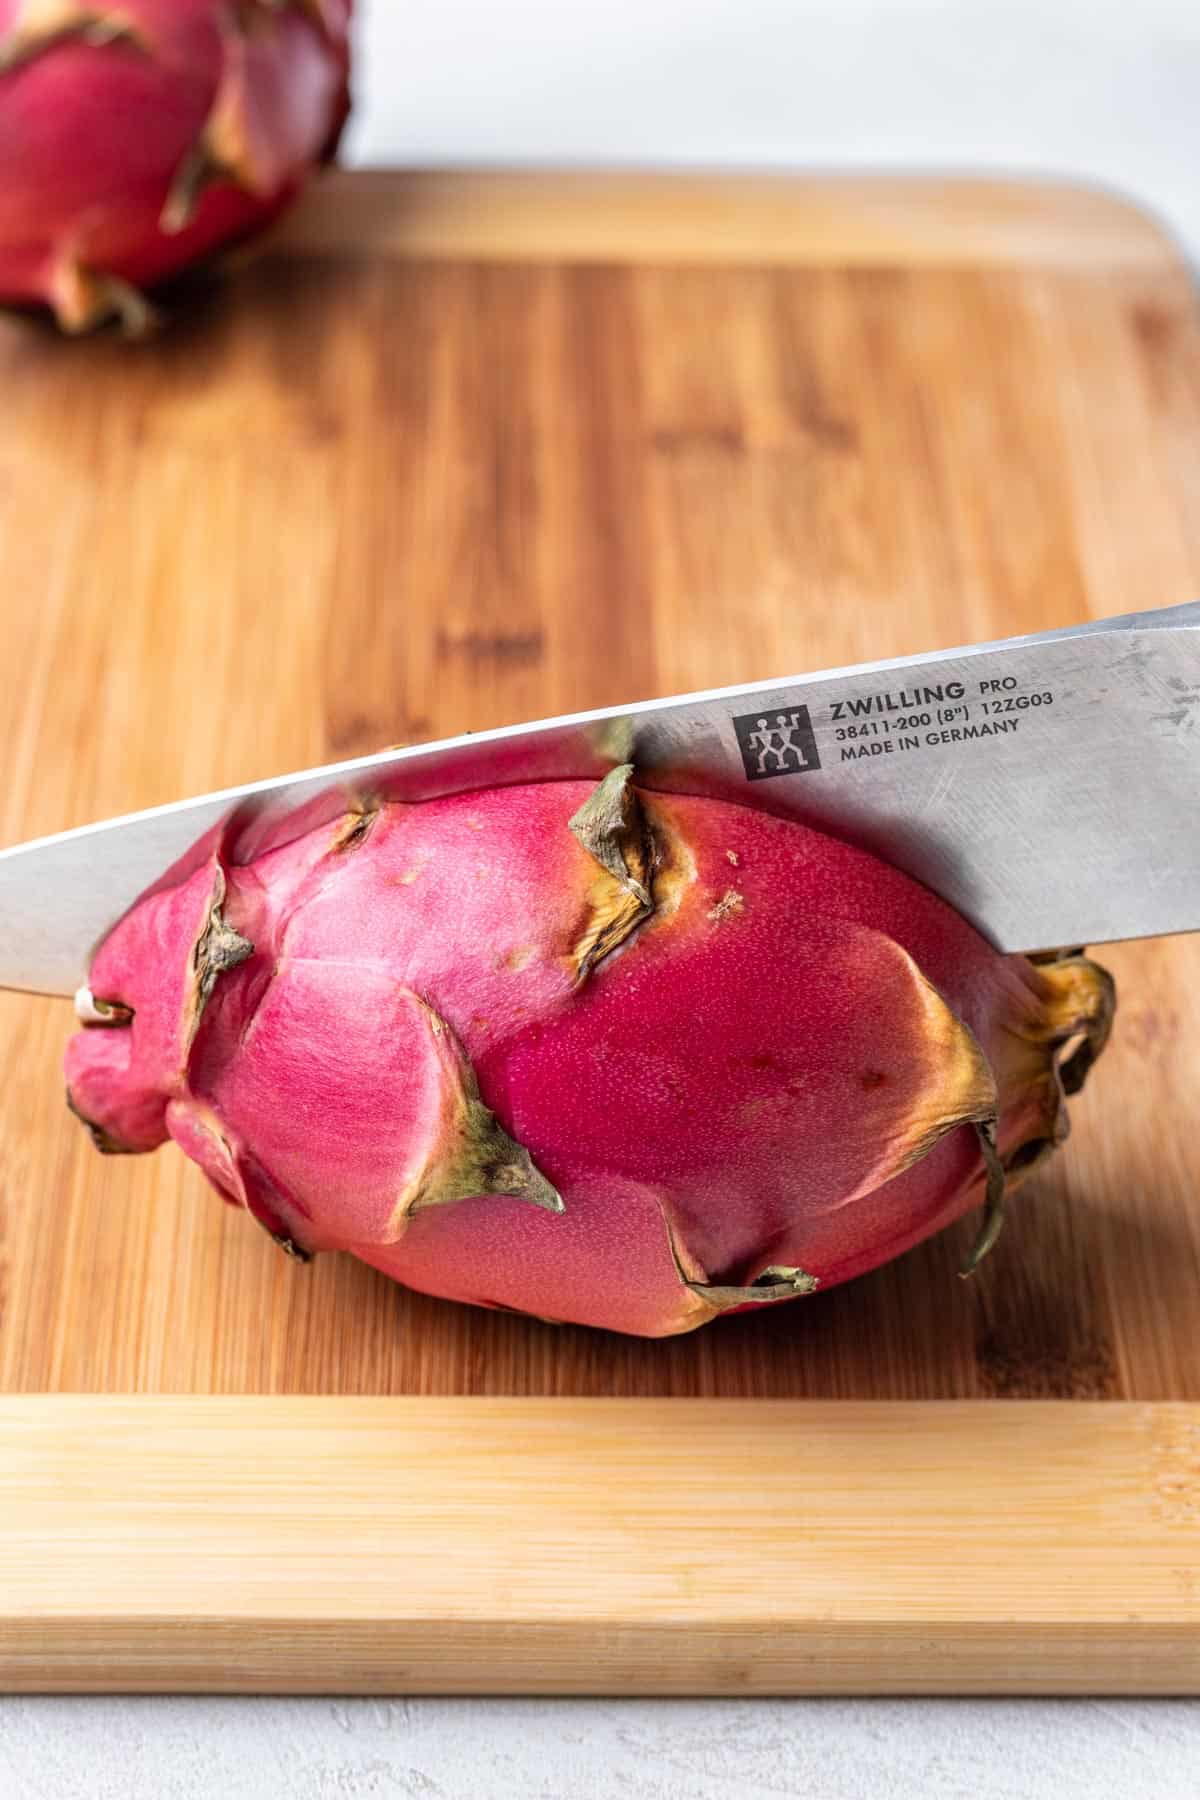 A chef's knife cutting a dragon fruit in half lengthwise.